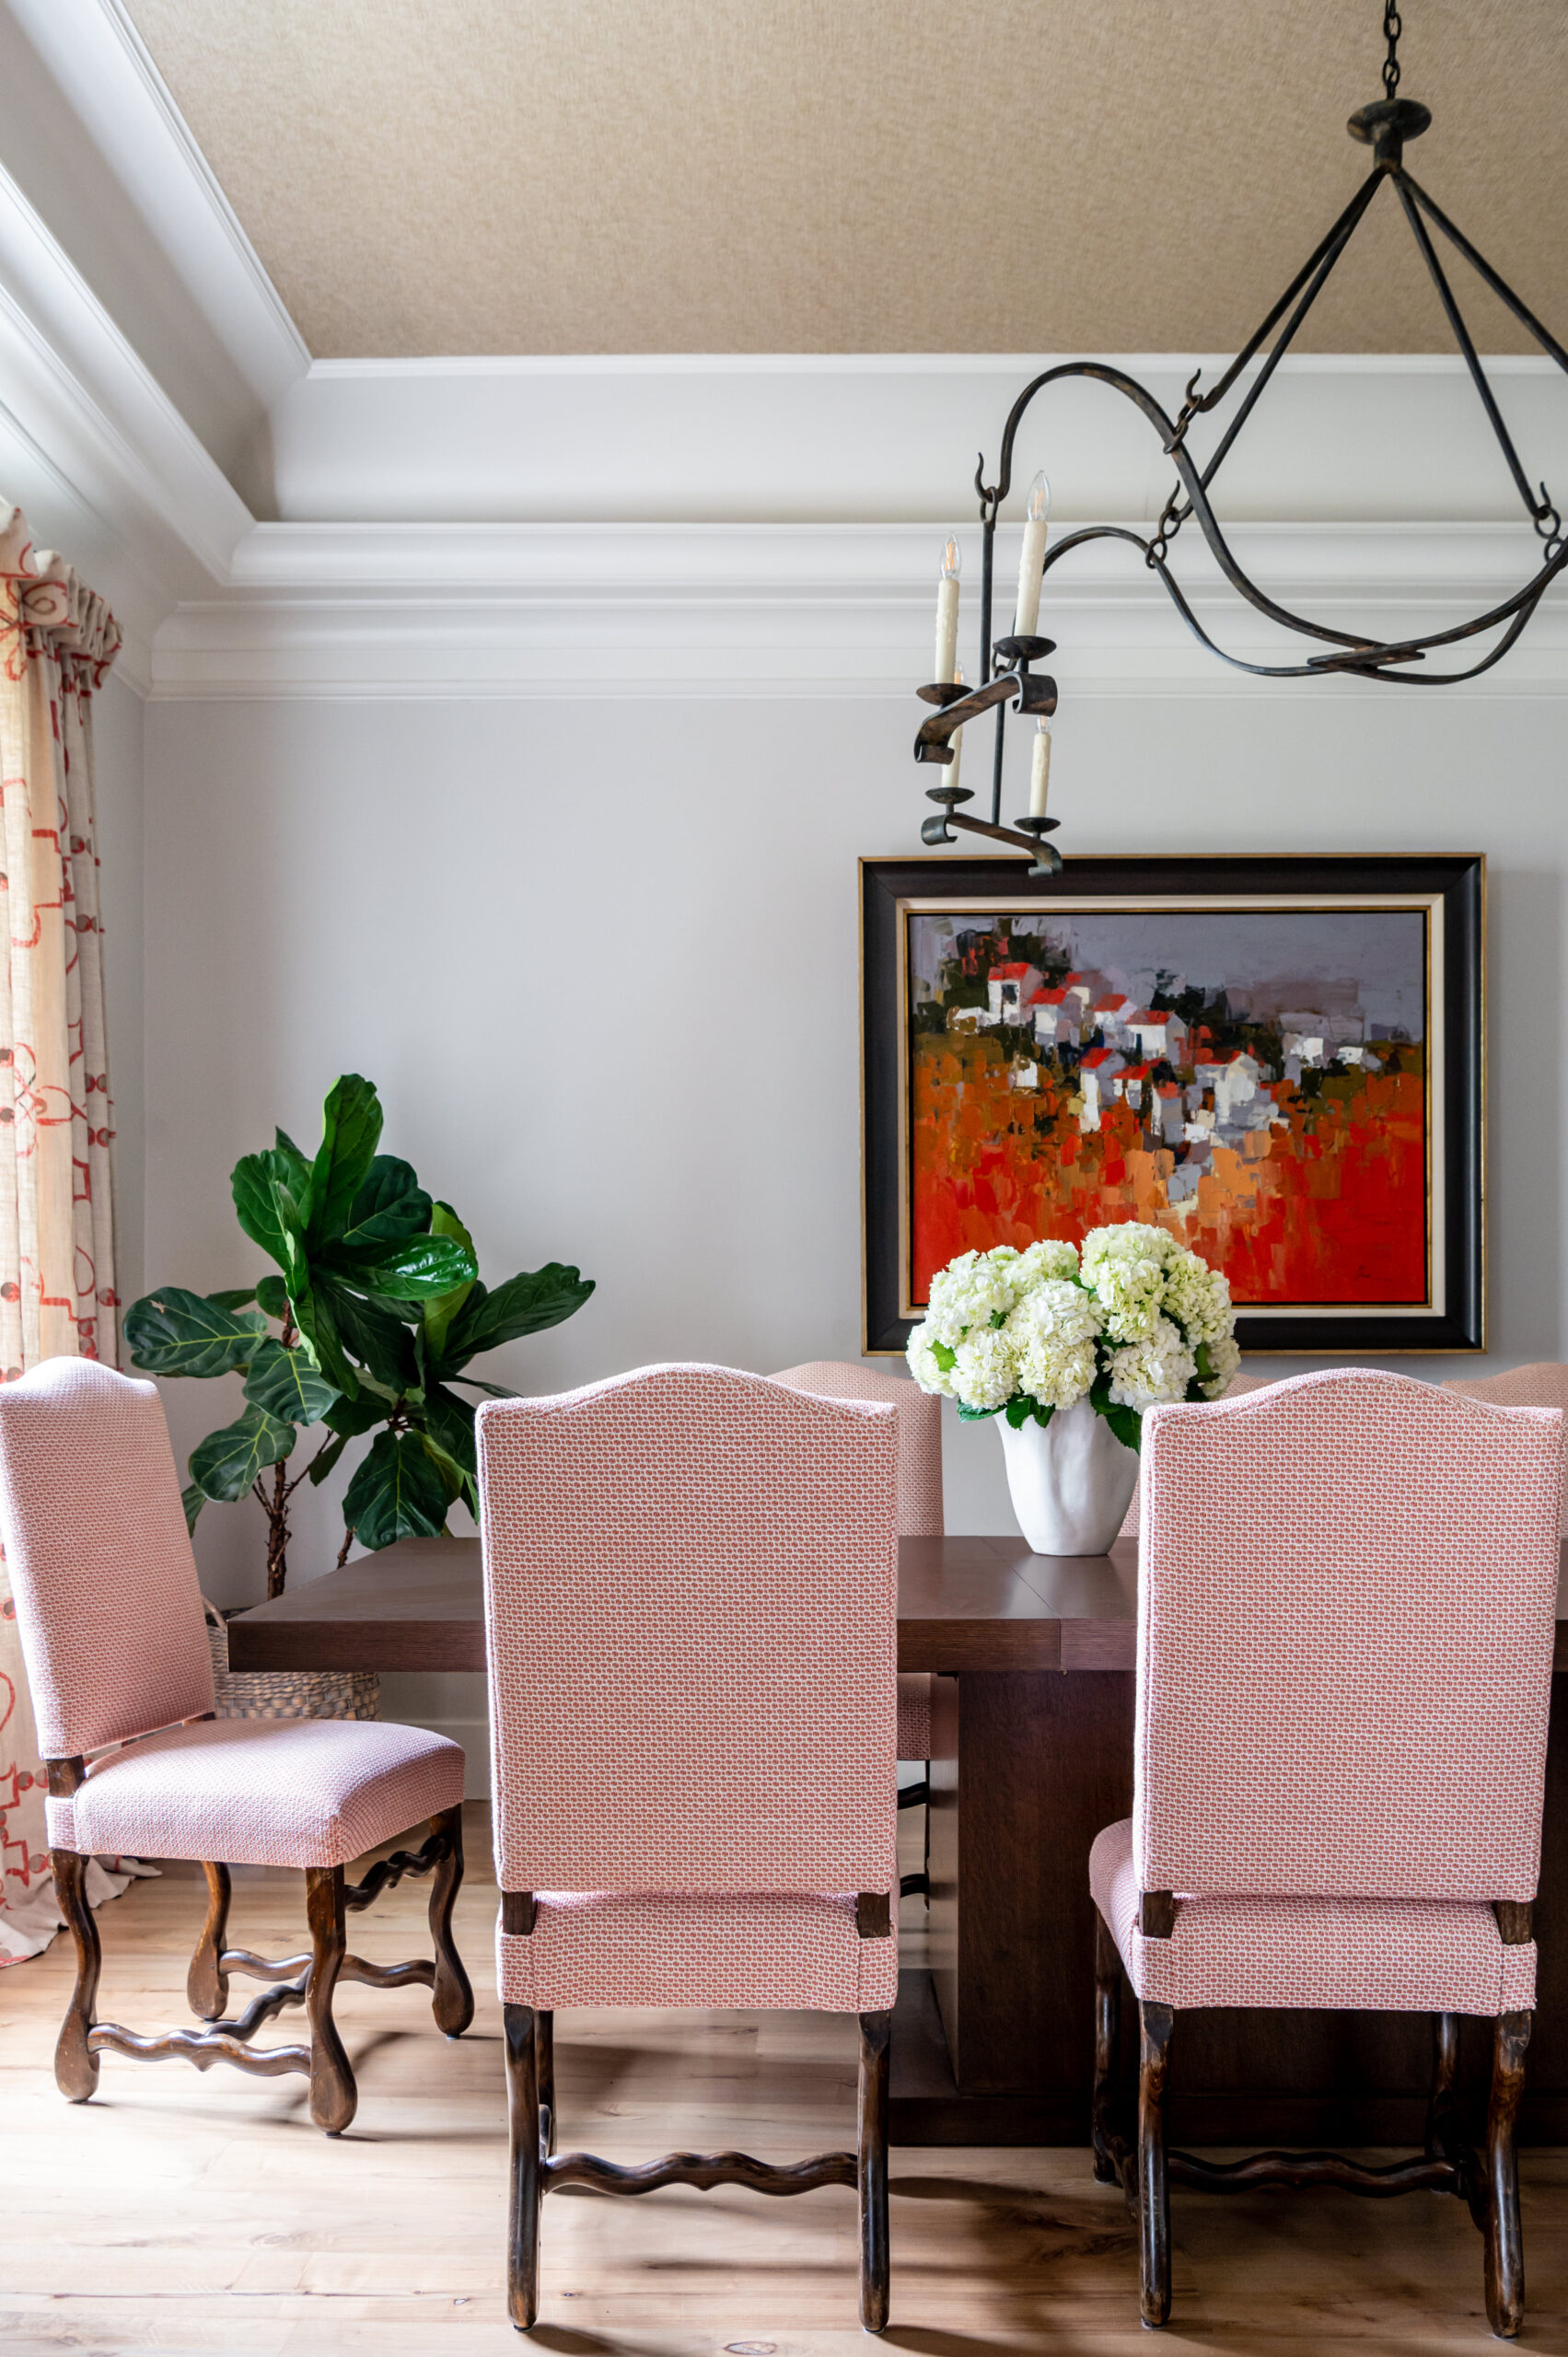 A Stunning Interior Design and styling Photoshoot for Daly Gentry Designs